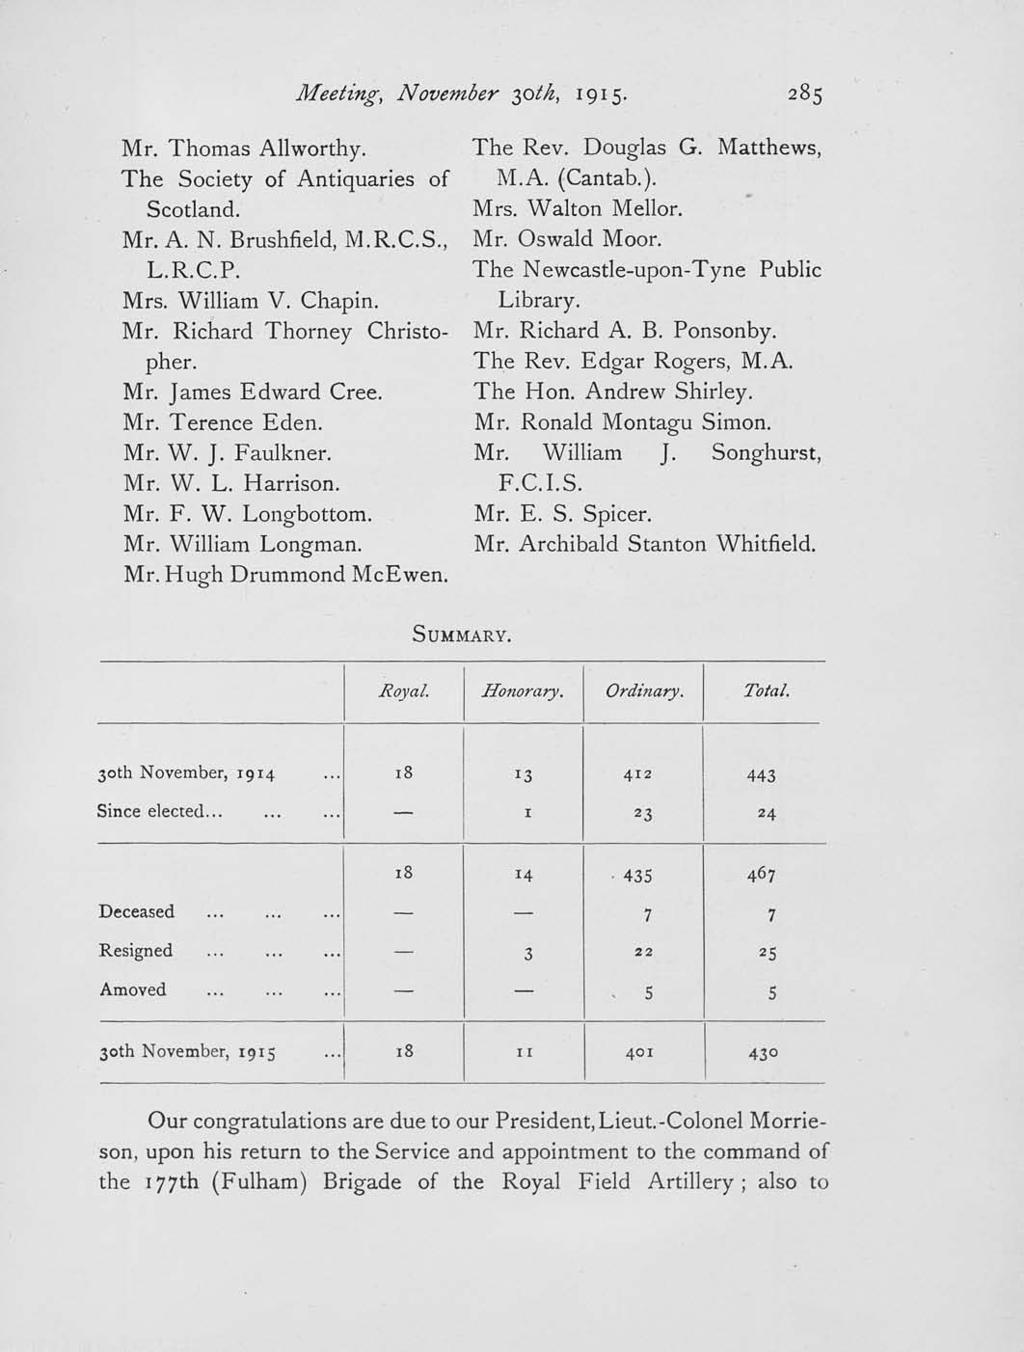 Meeting, November 30th, 1915. 285 Mr. Thomas All worthy. The Society of Antiquaries of Scotland. Mr. A. N. Brushfield, M.R.C.S., L.R.C.P. Mrs. William V. Chapin. Mr. Richard Thorney Christopher. Mr. James Edward Cree.